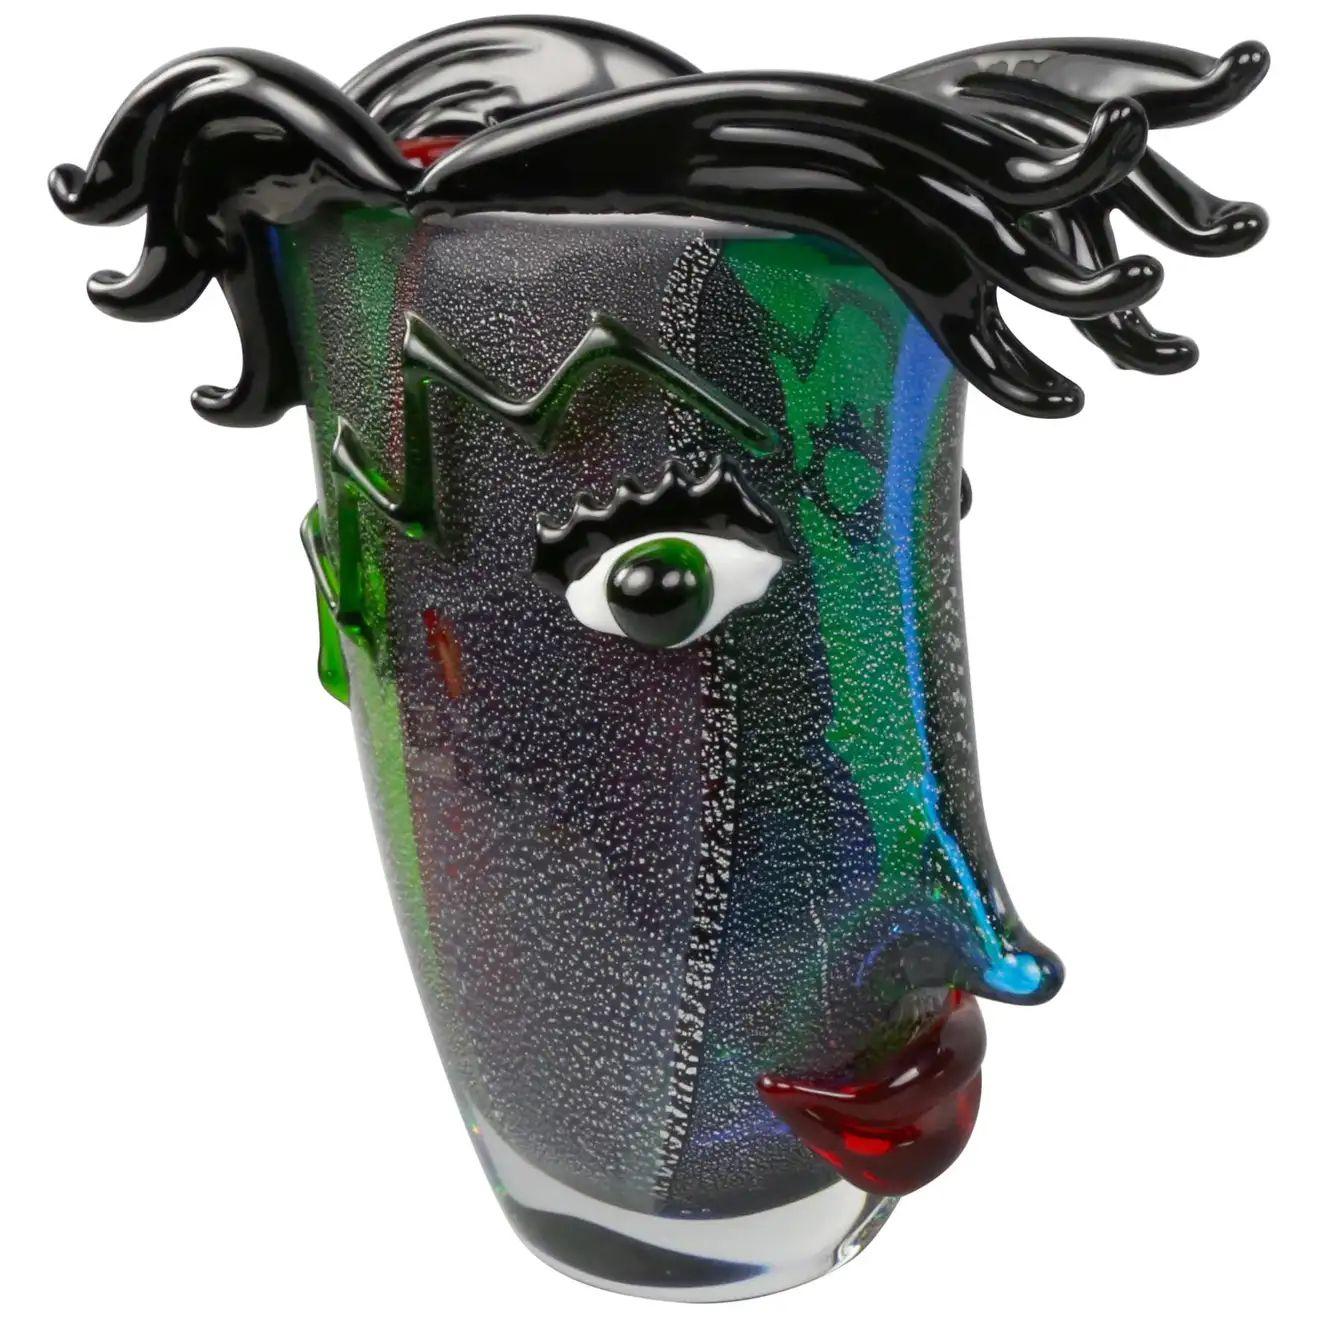 Spectacular Murano Art glass face Sculpture vase made in celebration to Picasso. The handcrafted multicolored sculpture is signed by the artist. The colors can appear to be more intense in different light conditions and angles. Measures